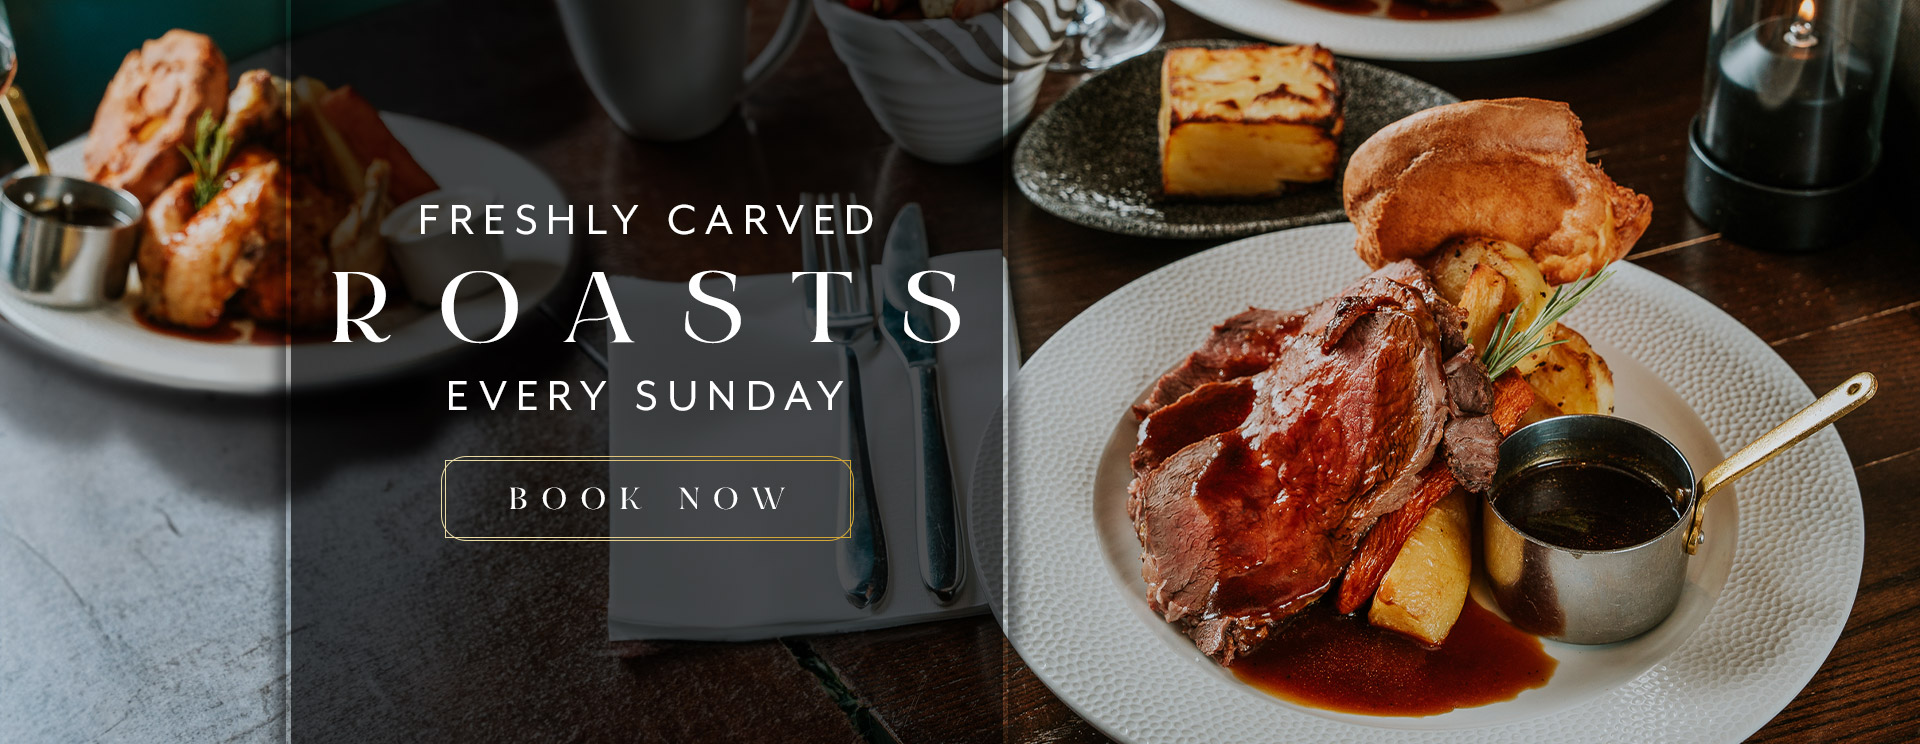 Sunday Lunch at The Lyttelton Arms